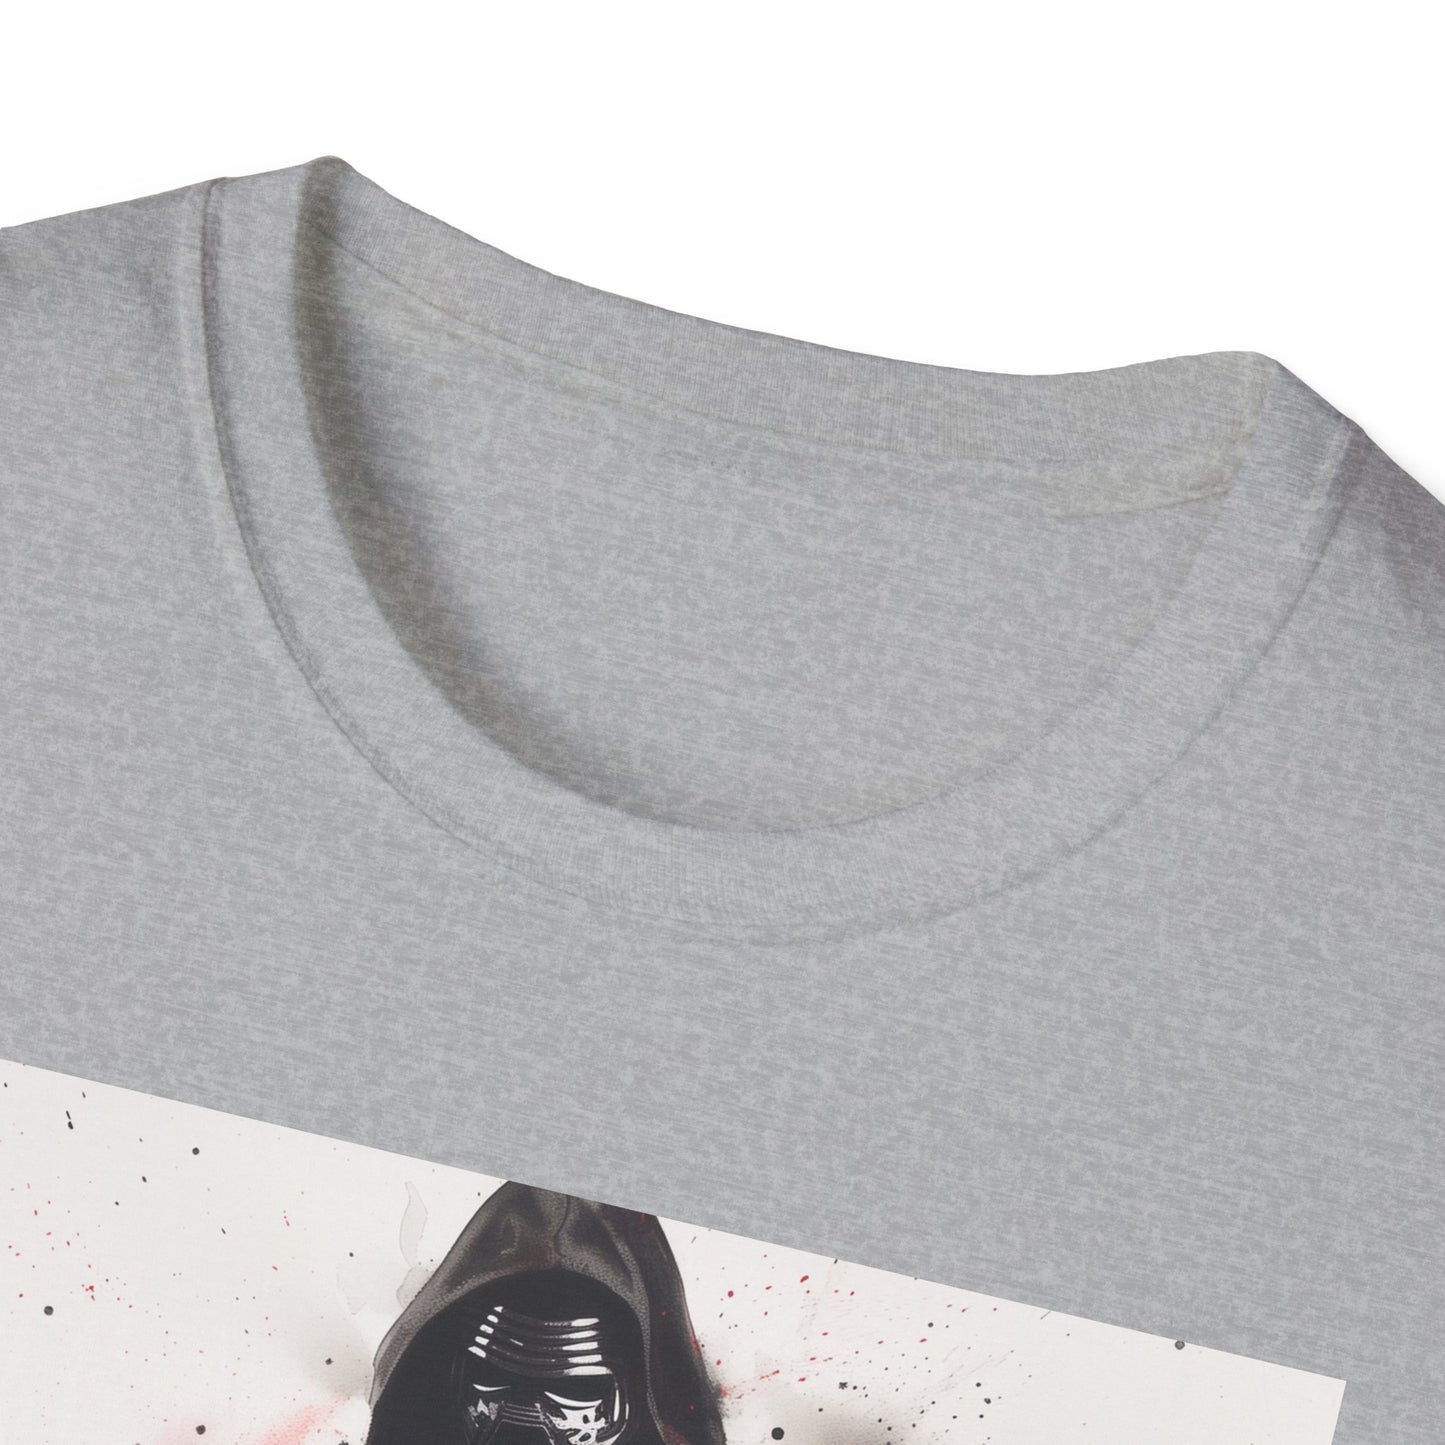 Kylo Ren: Rise of the First Order T-Shirt